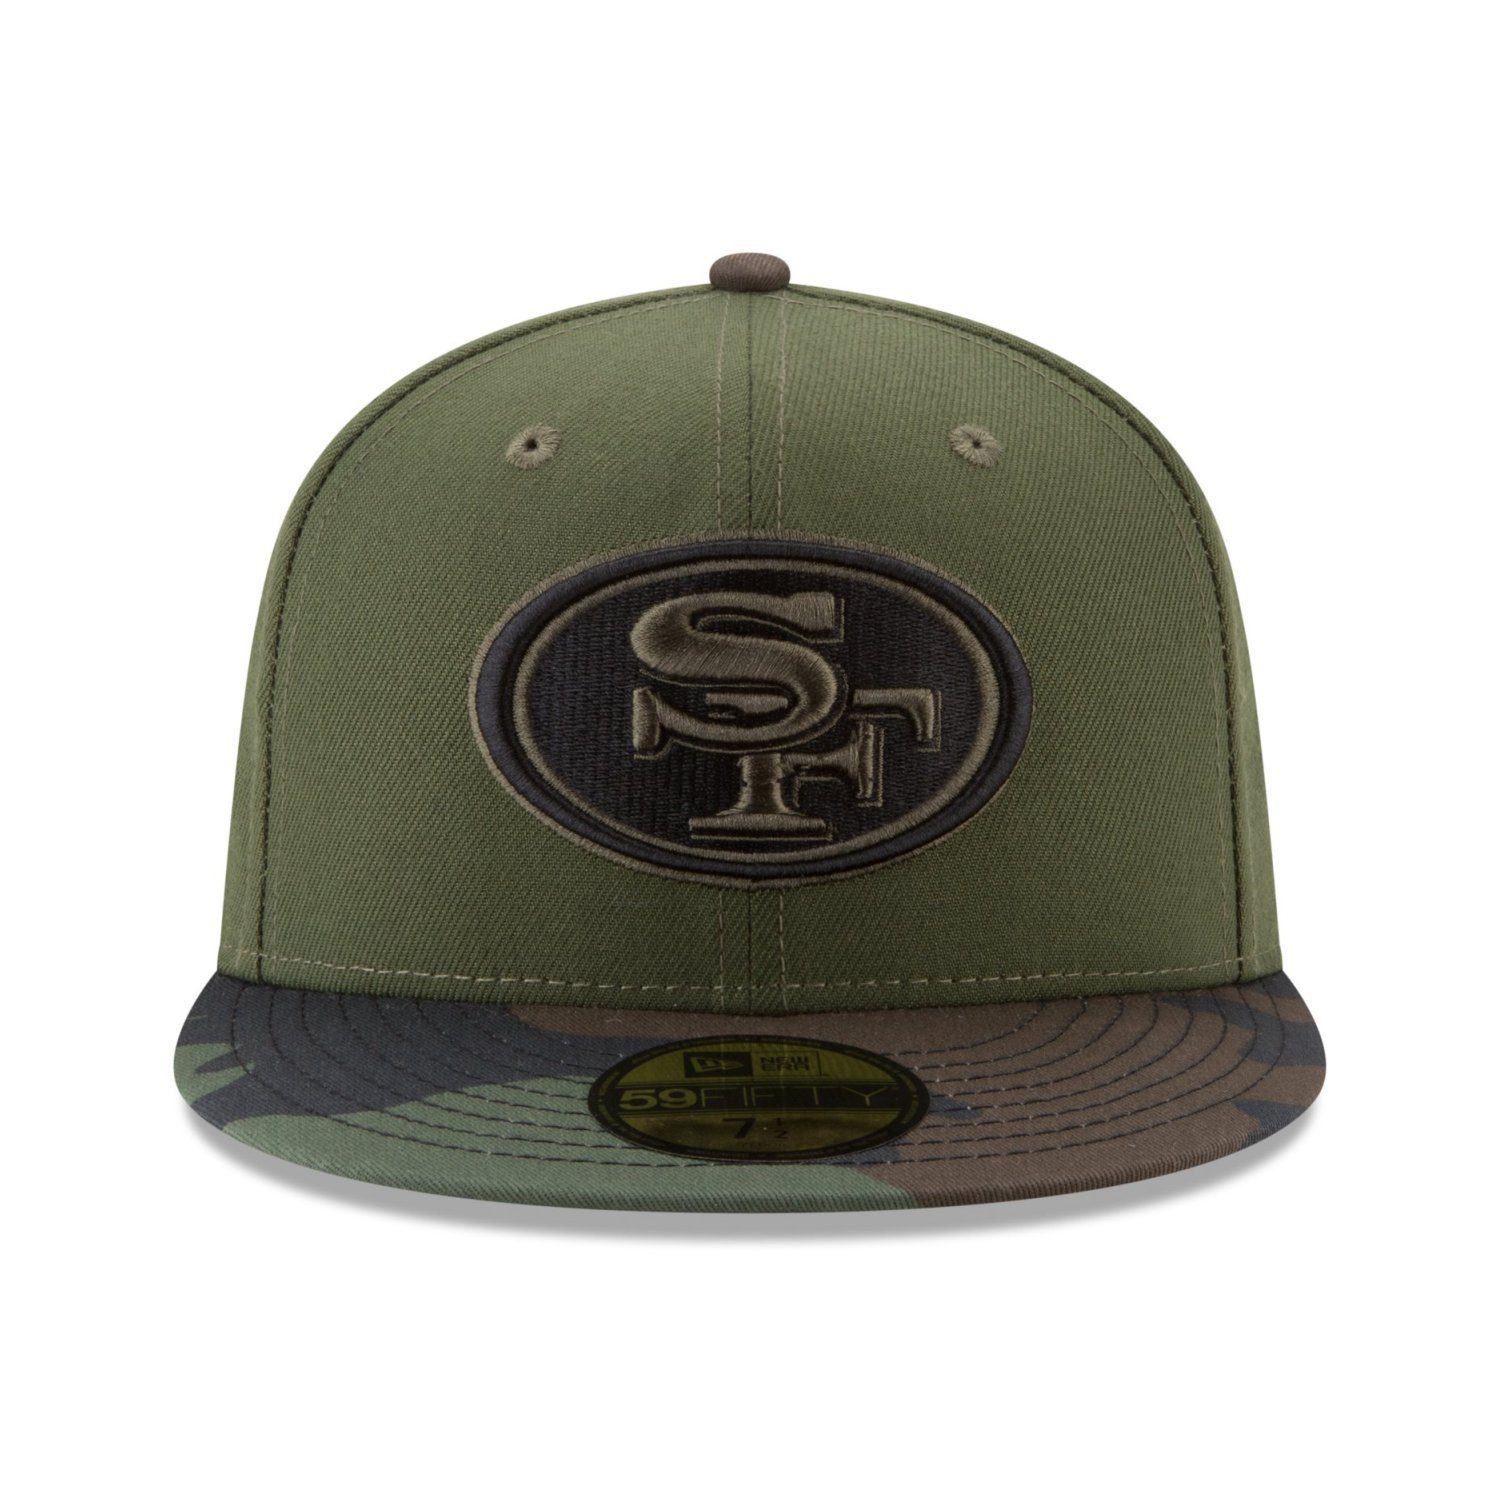 Fitted Francisco Cap 49ers 59Fifty New Era San